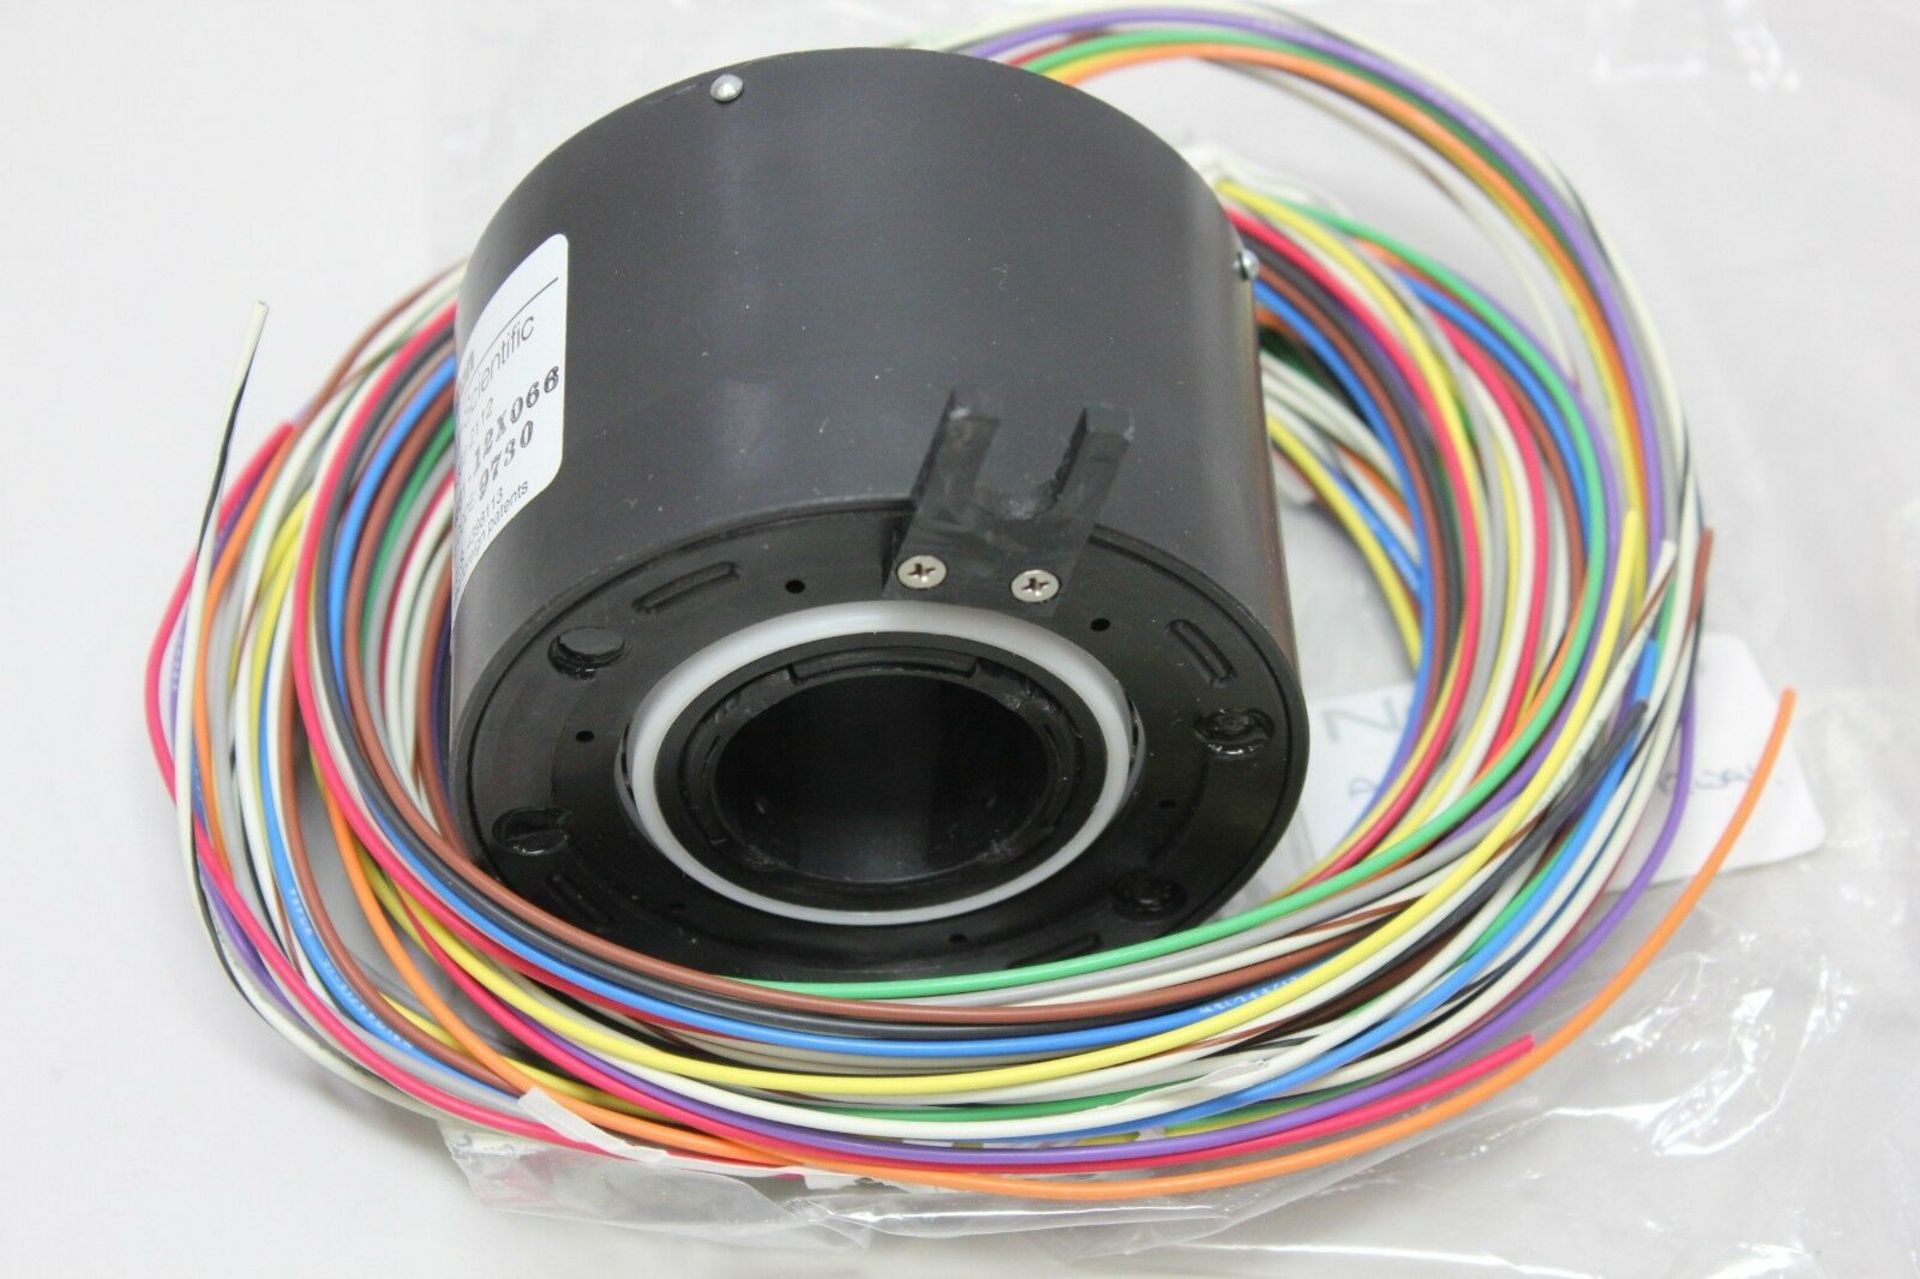 New Litton Poly Scientific 12 Way Slip Ring Slipring Assembly - Image 3 of 4